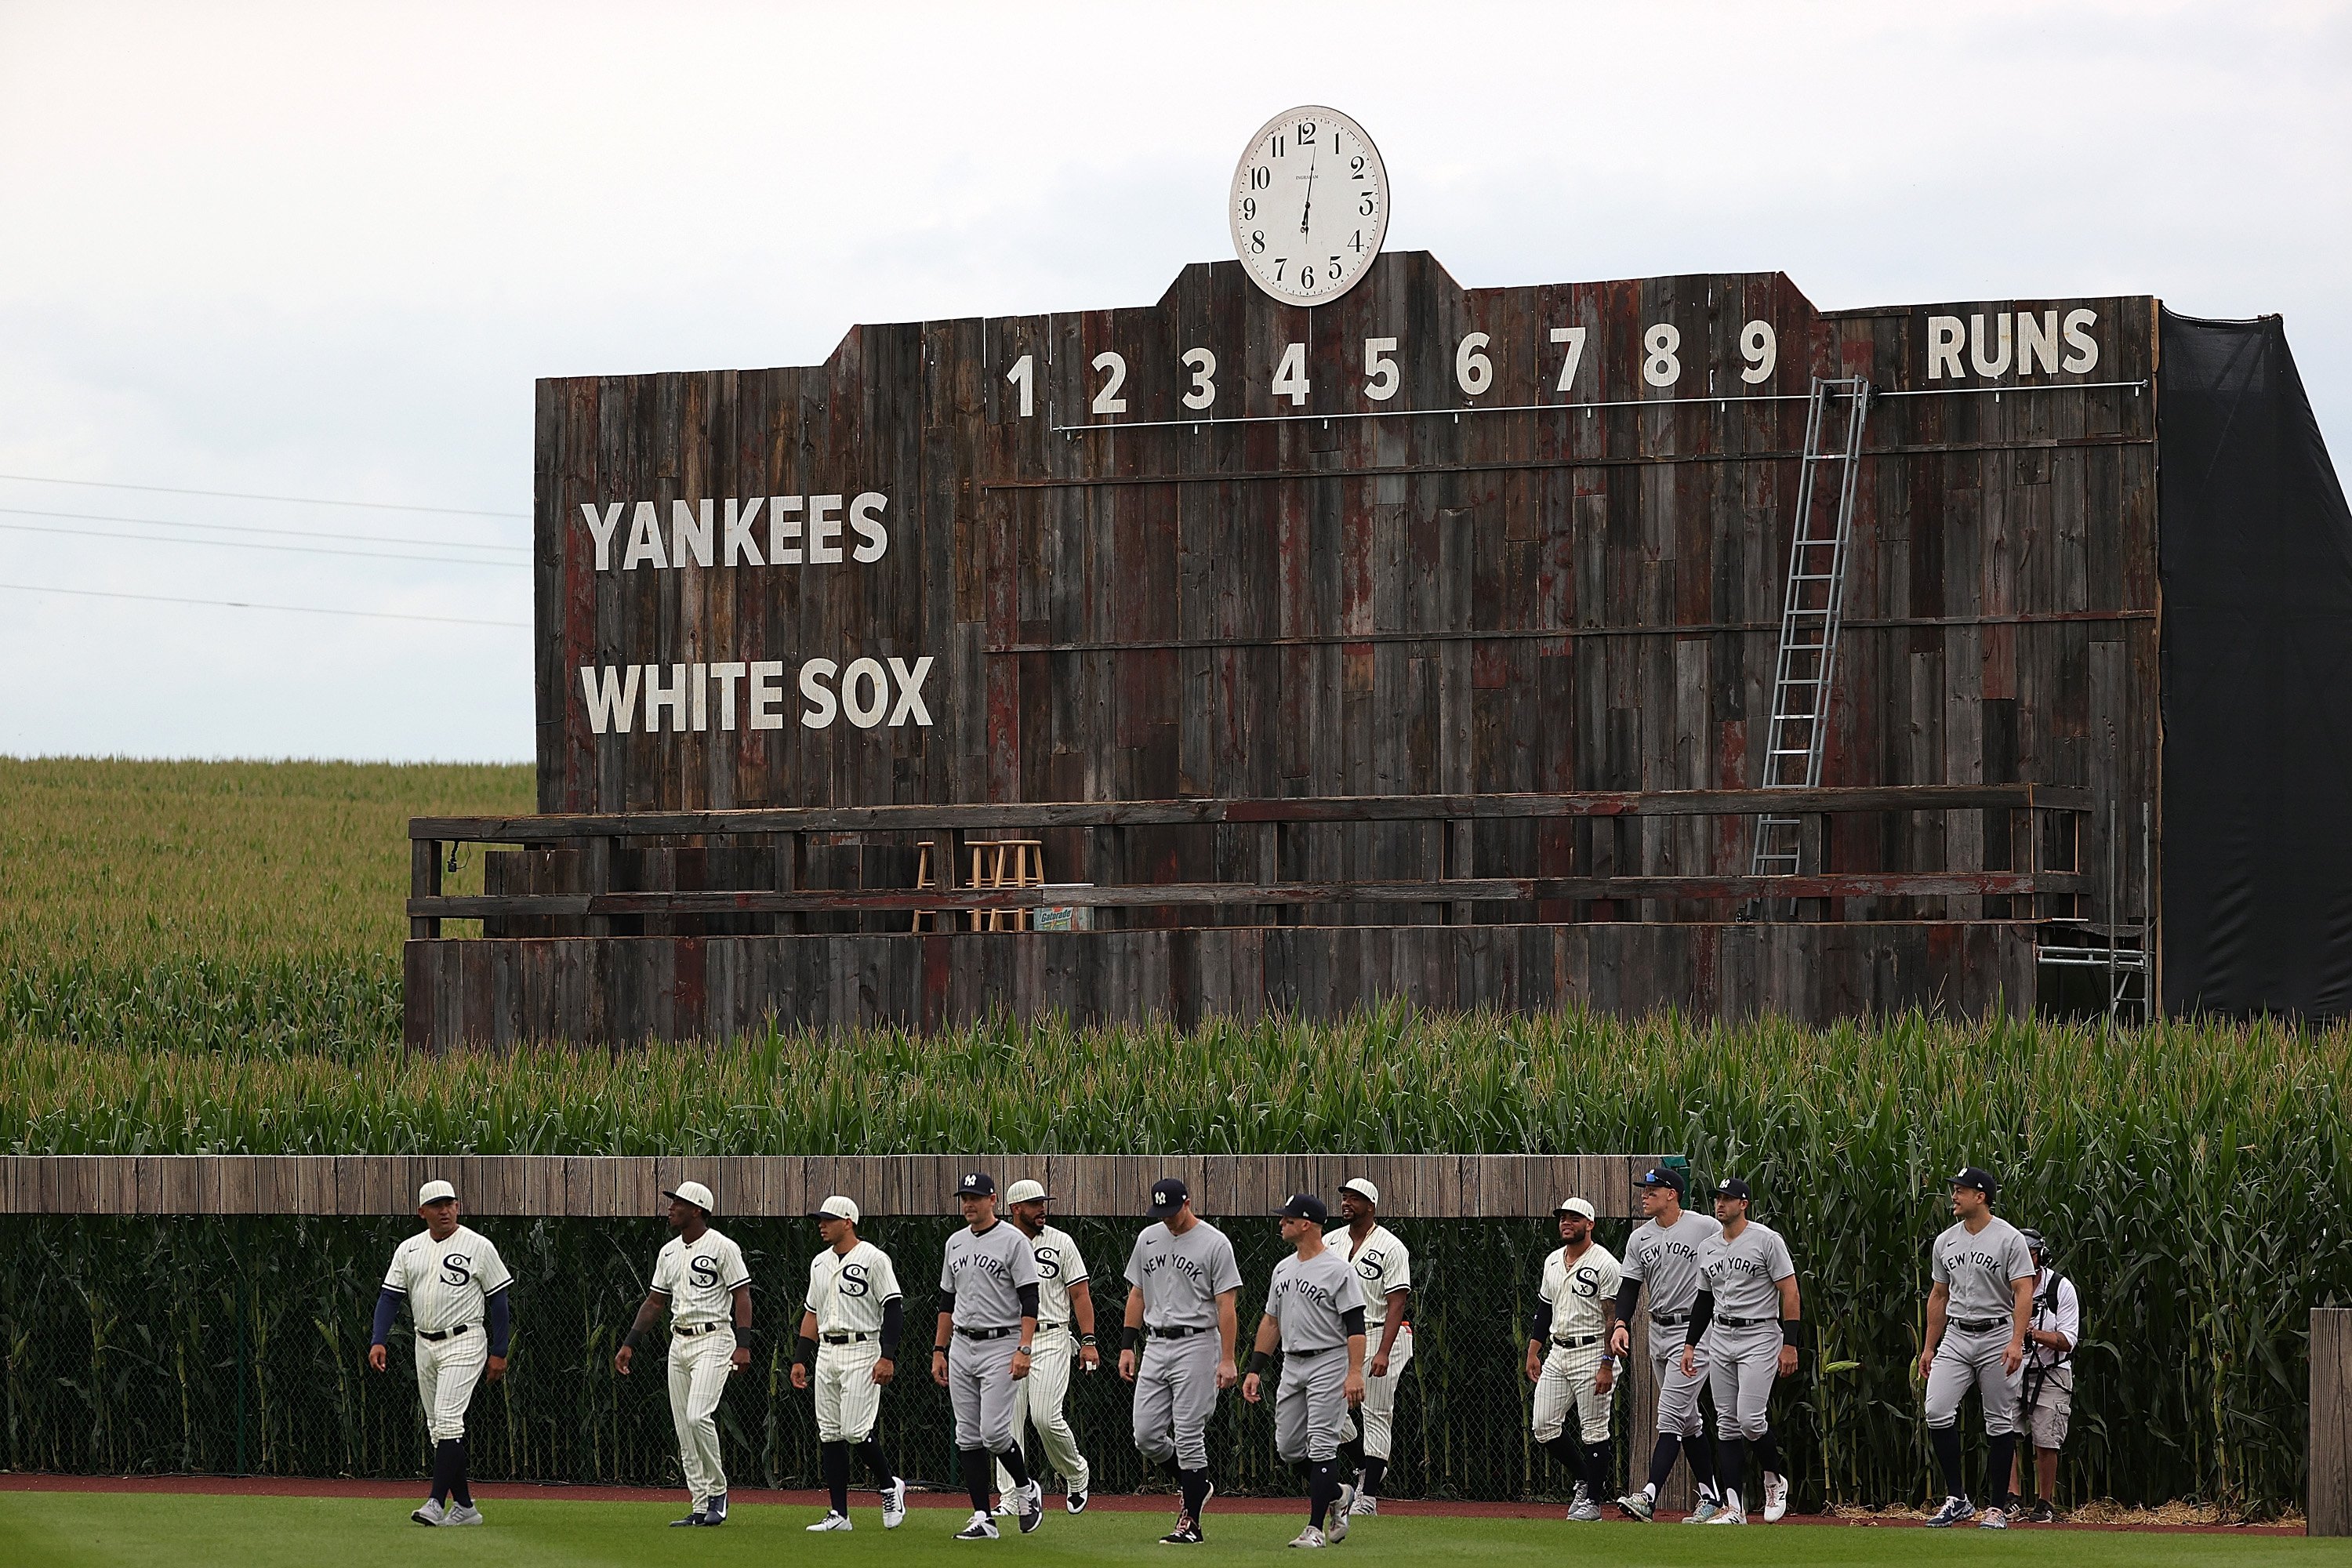 Members of the Chicago White Sox and the New York Yankees take the field prior to a game at the Field of Dreams